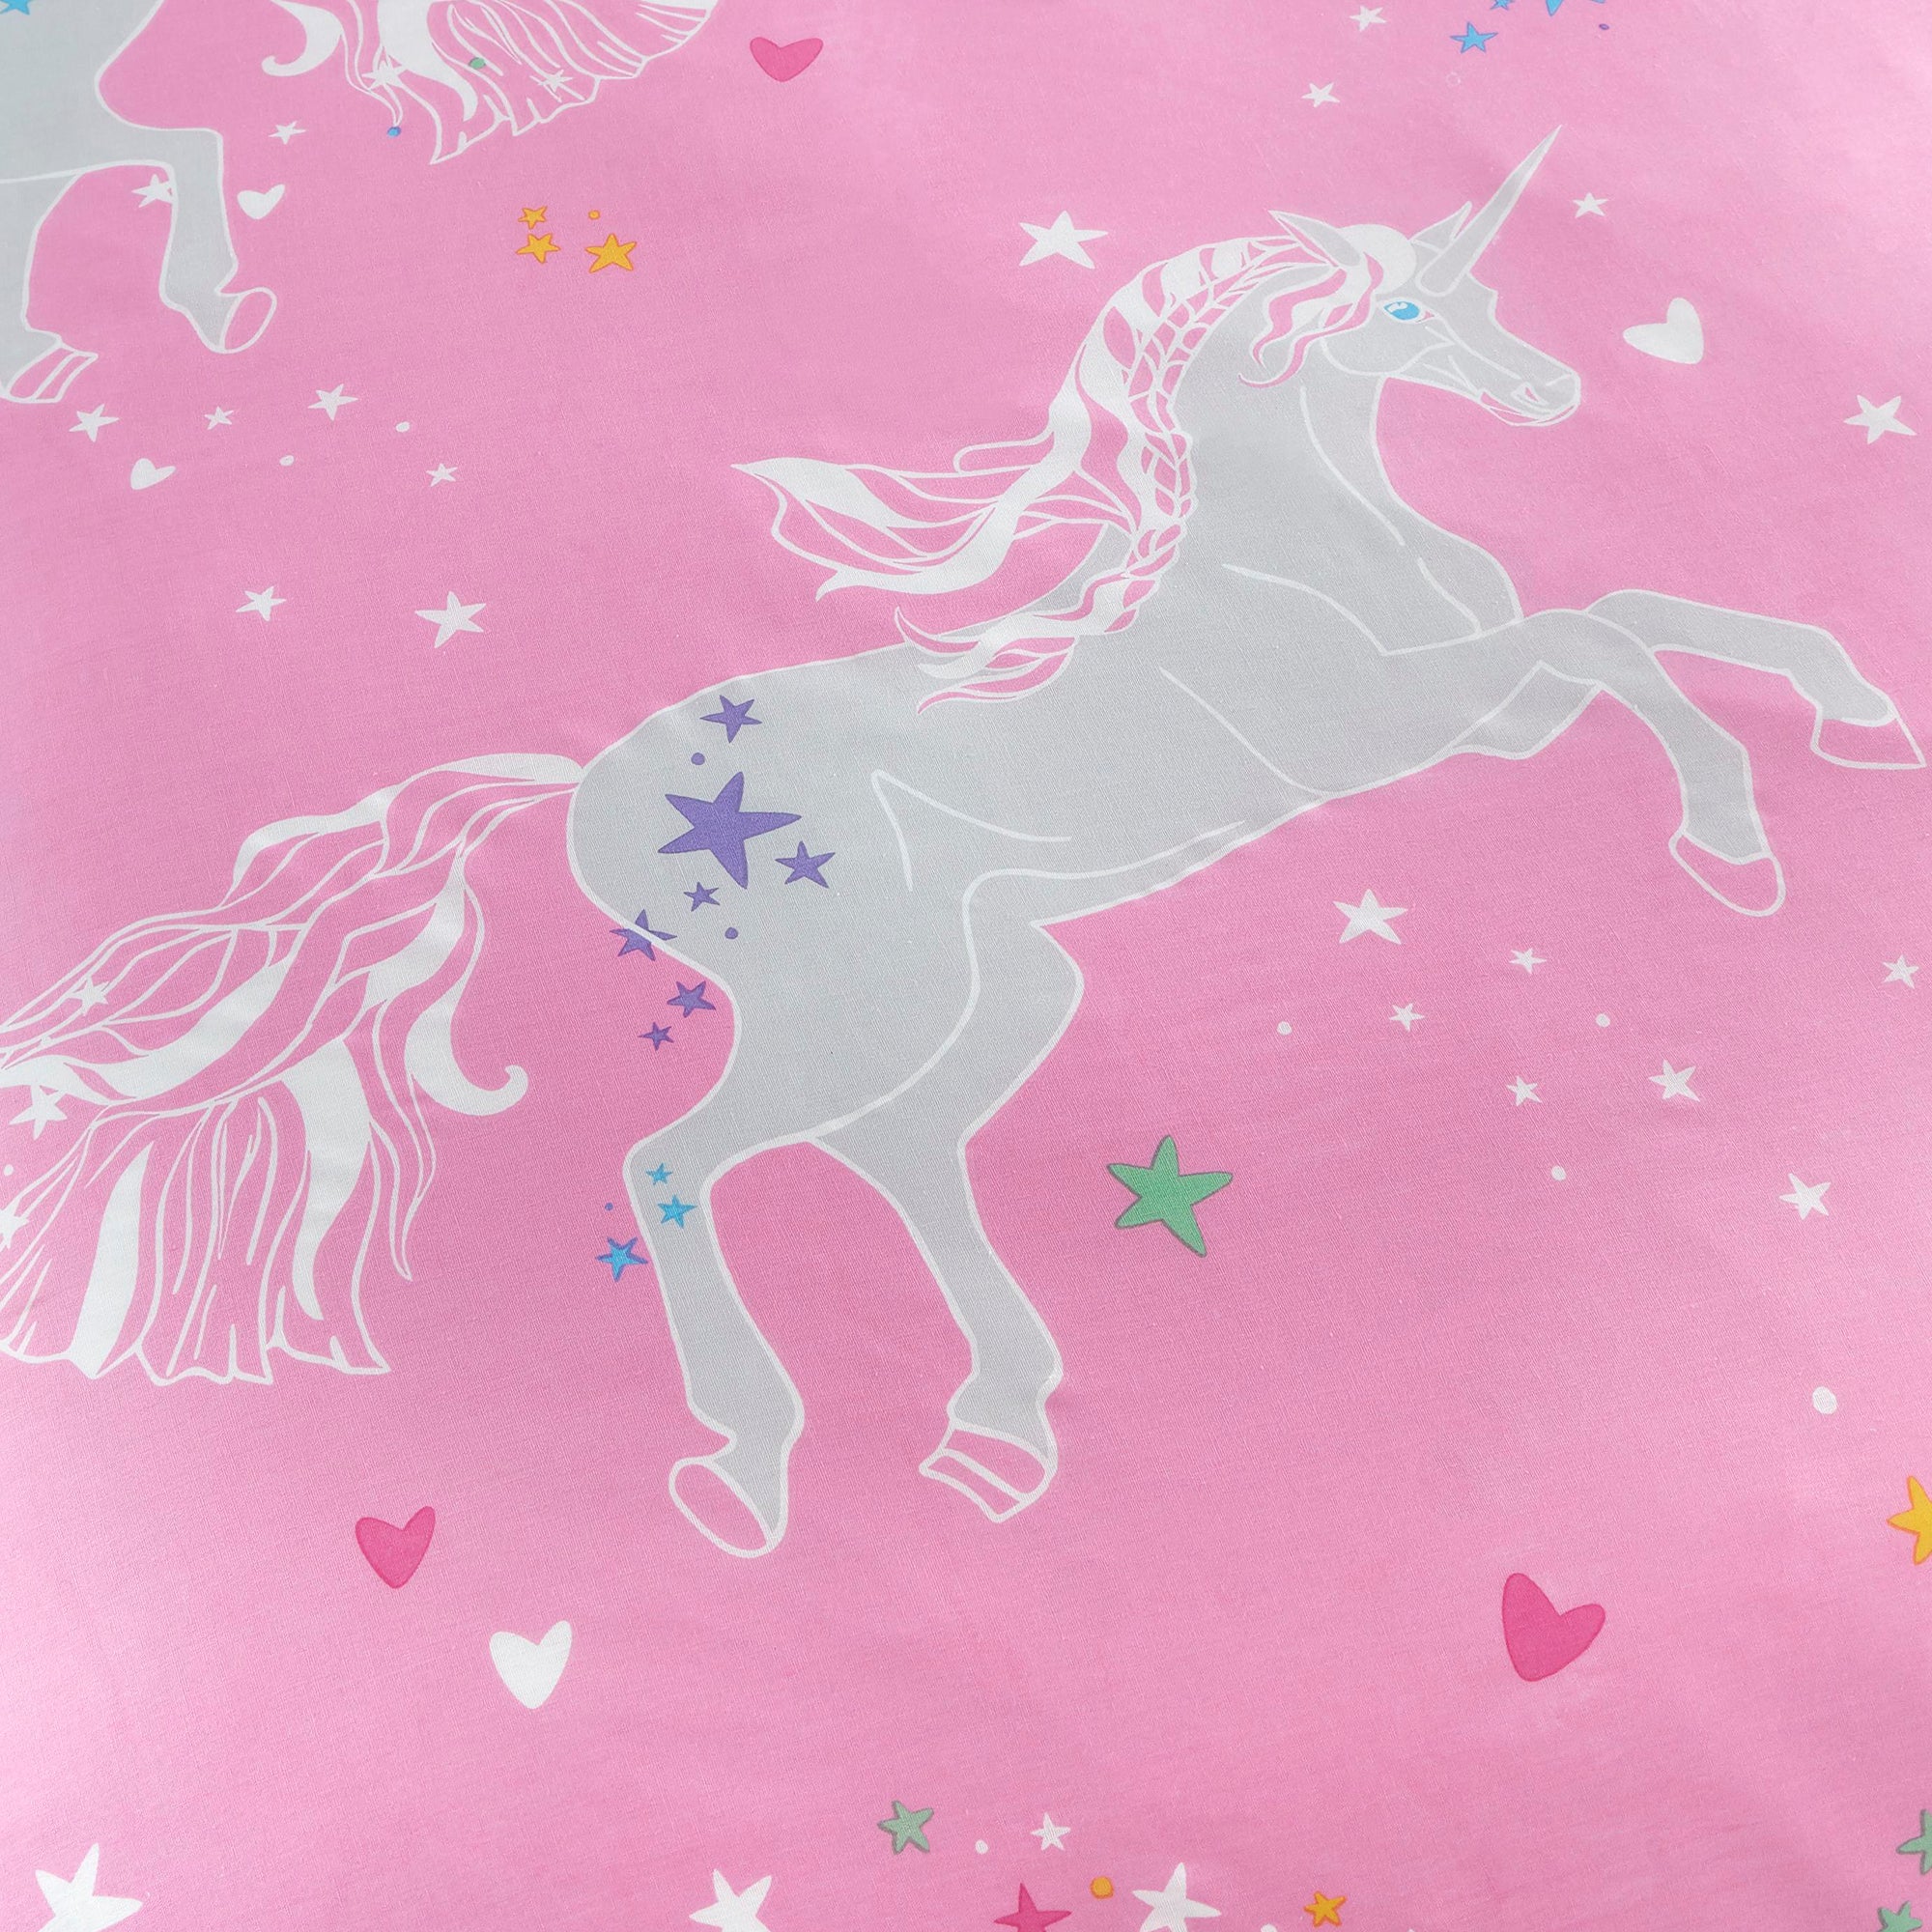 Unicorn Glow - Glow in the Dark Duvet Cover Set, Curtains & Fitted Sheets in Pink - by Bedlam